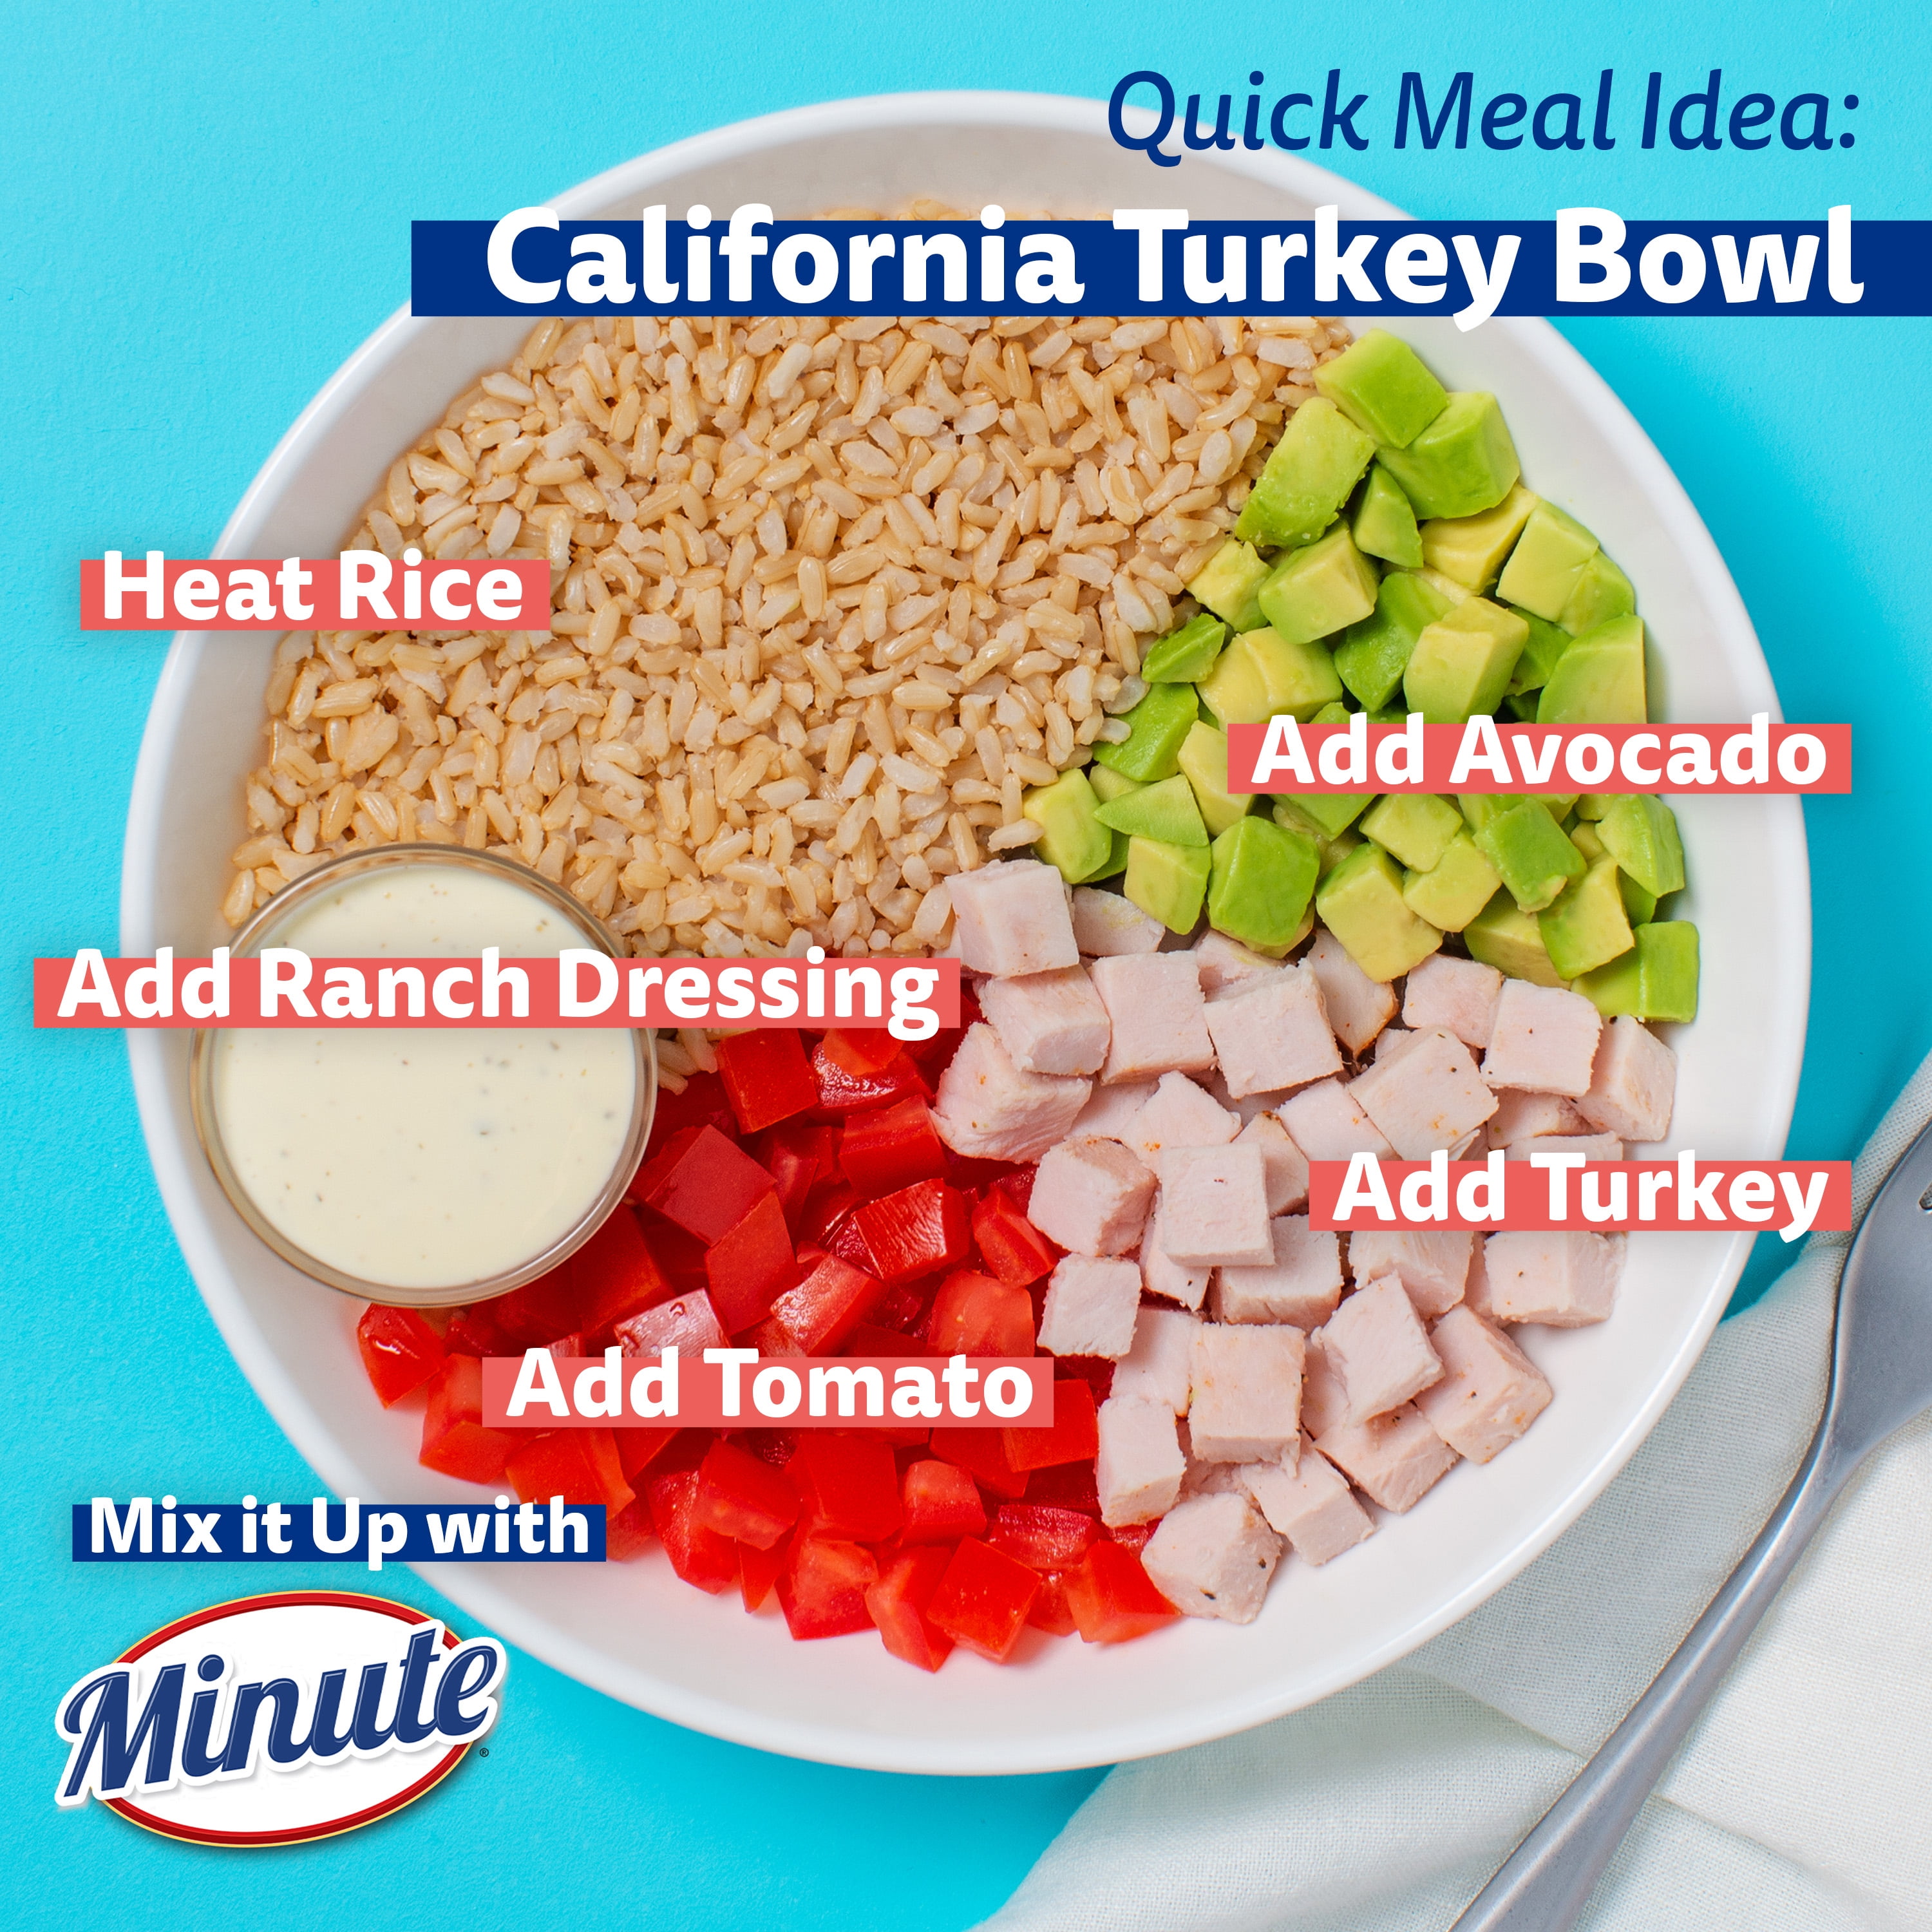 Minute® Ready to Serve White Rice 2-4.4 oz. Cups